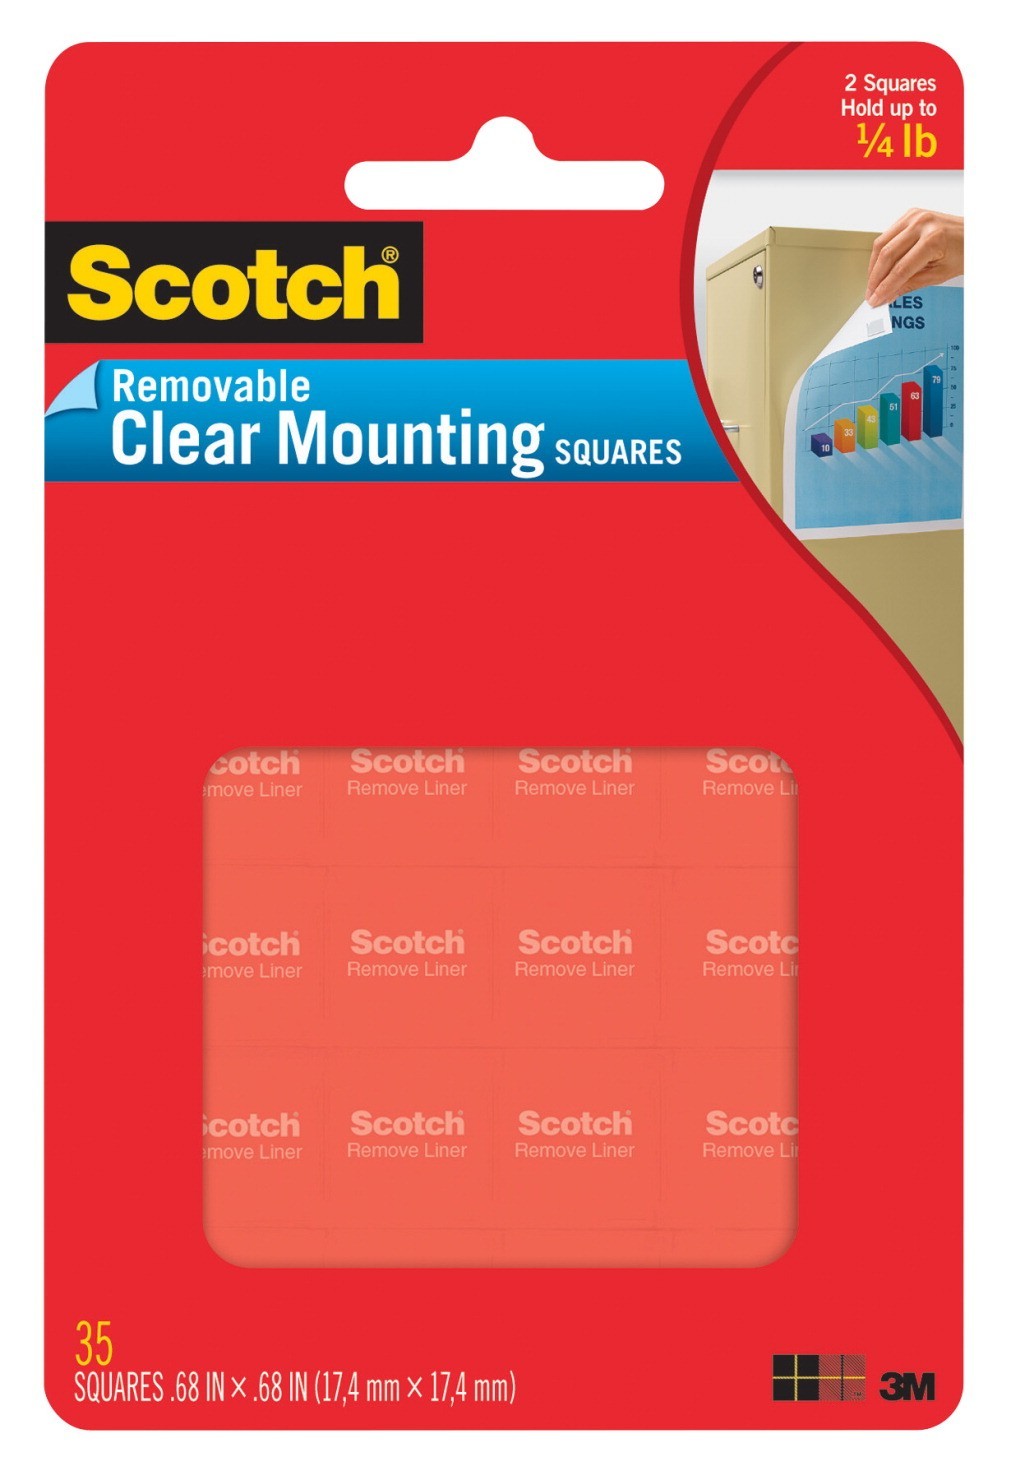 Scotch Removable Mounting Square, 11/16 X 11/16 in, 1/4 lb Capacity, Clear, Pack of 35